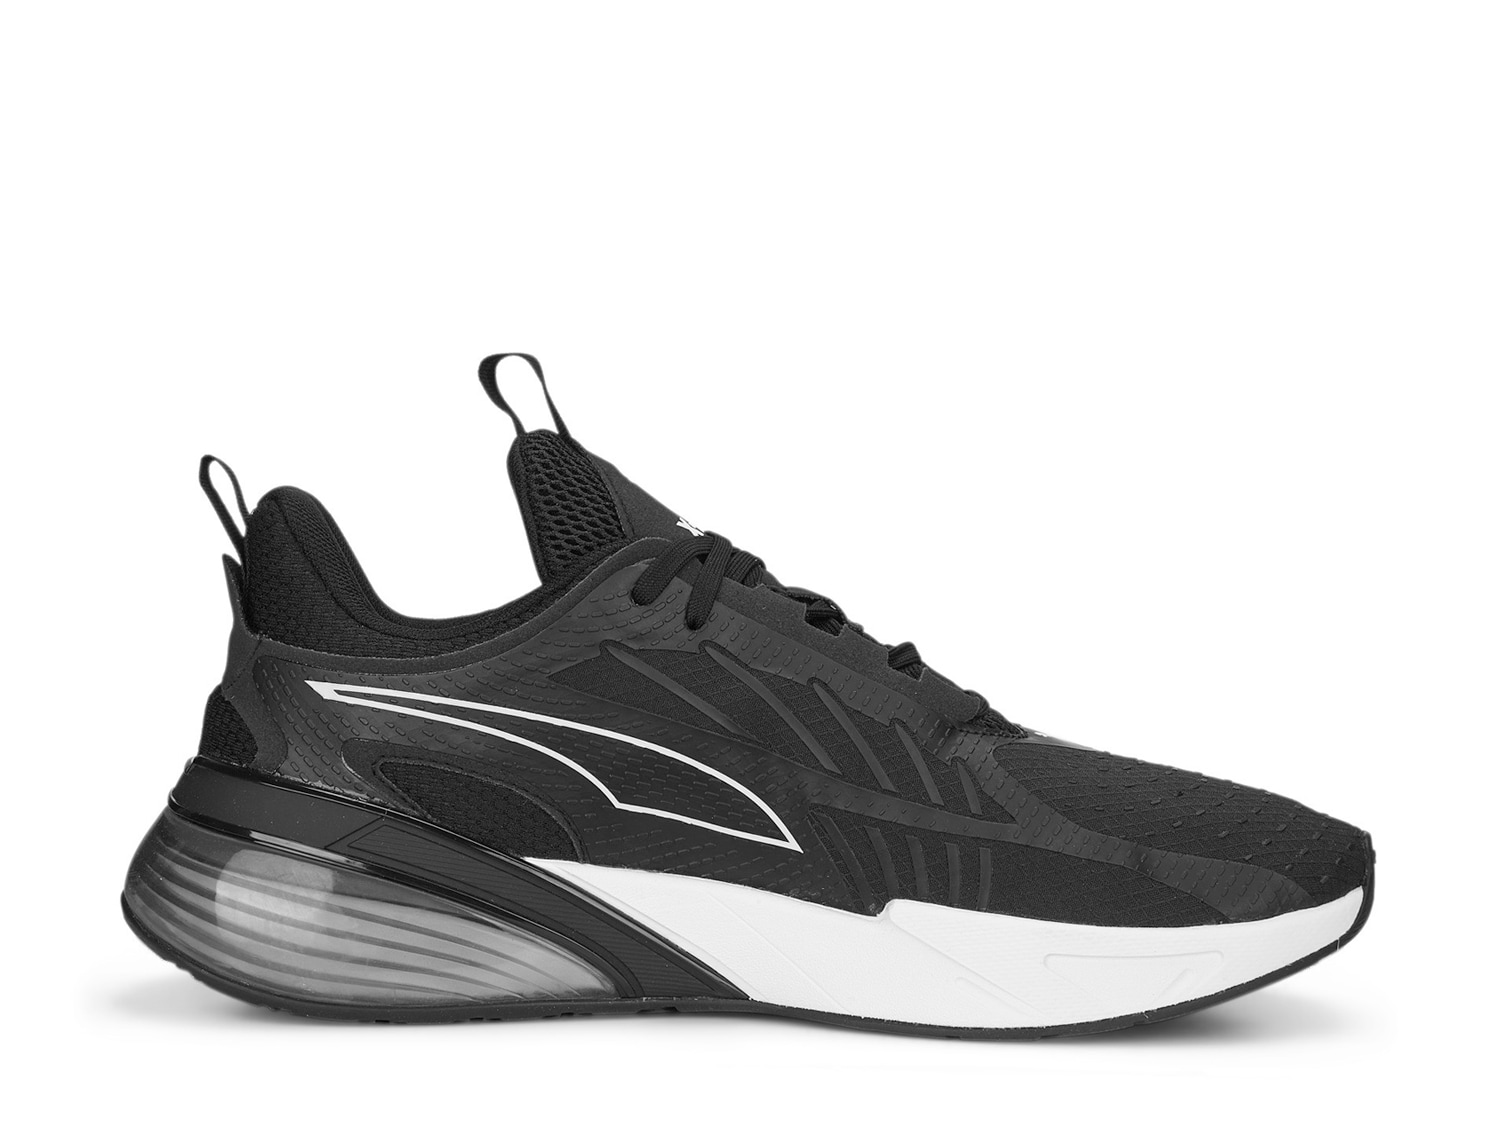 Puma X-Cell Action Running Shoe - Men's - Free Shipping | DSW